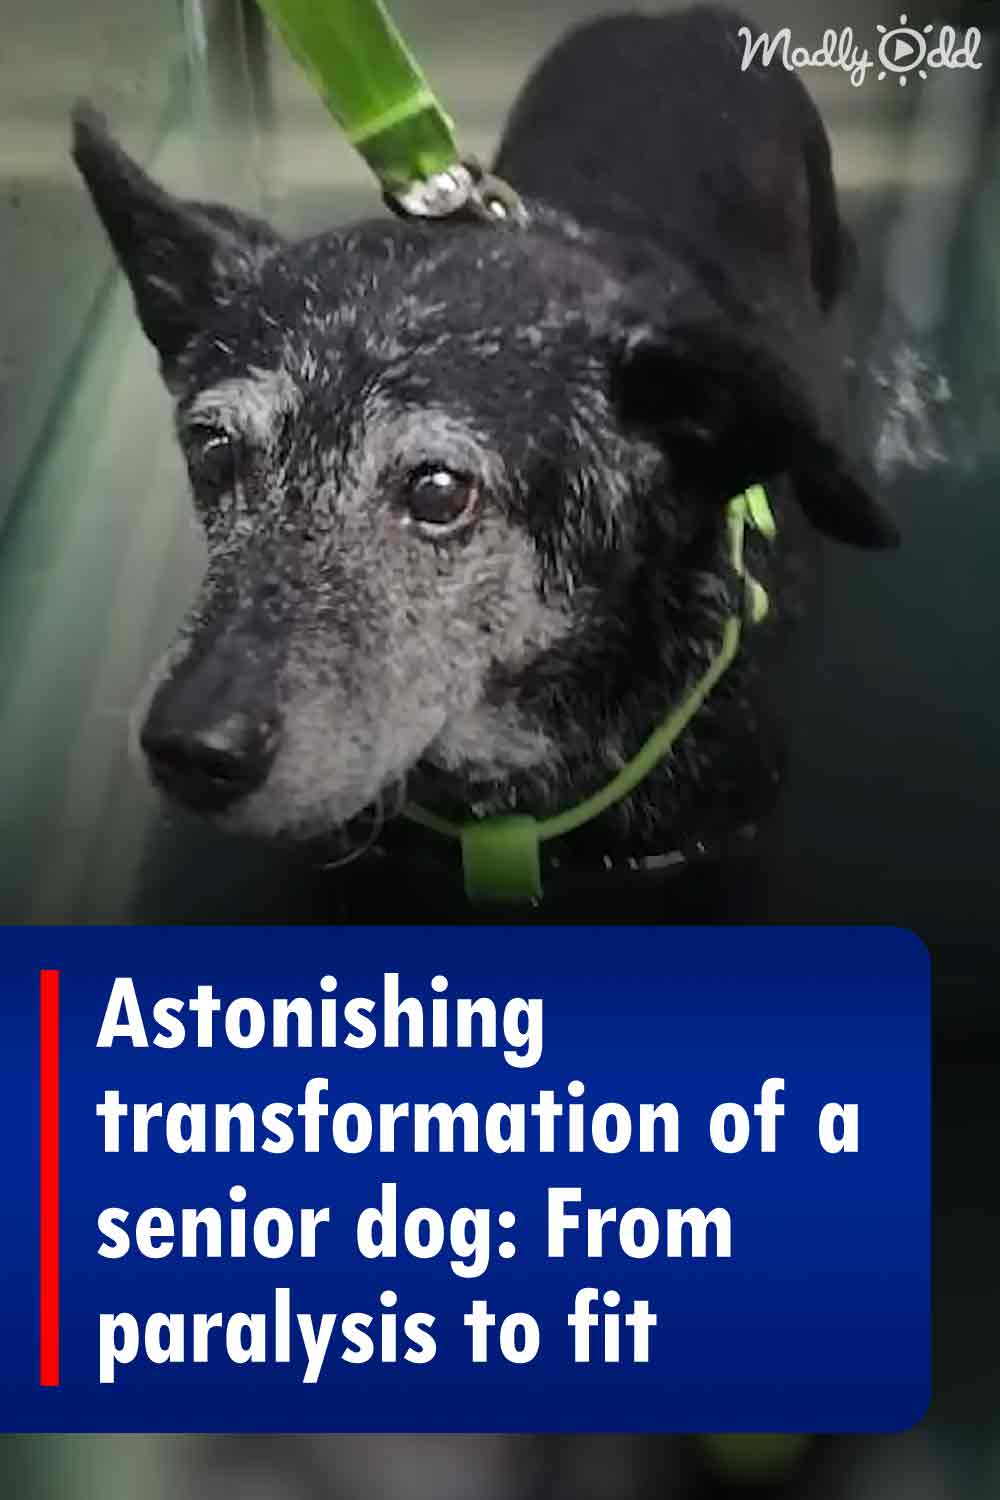 Astonishing transformation of a senior dog: From paralysis to fit